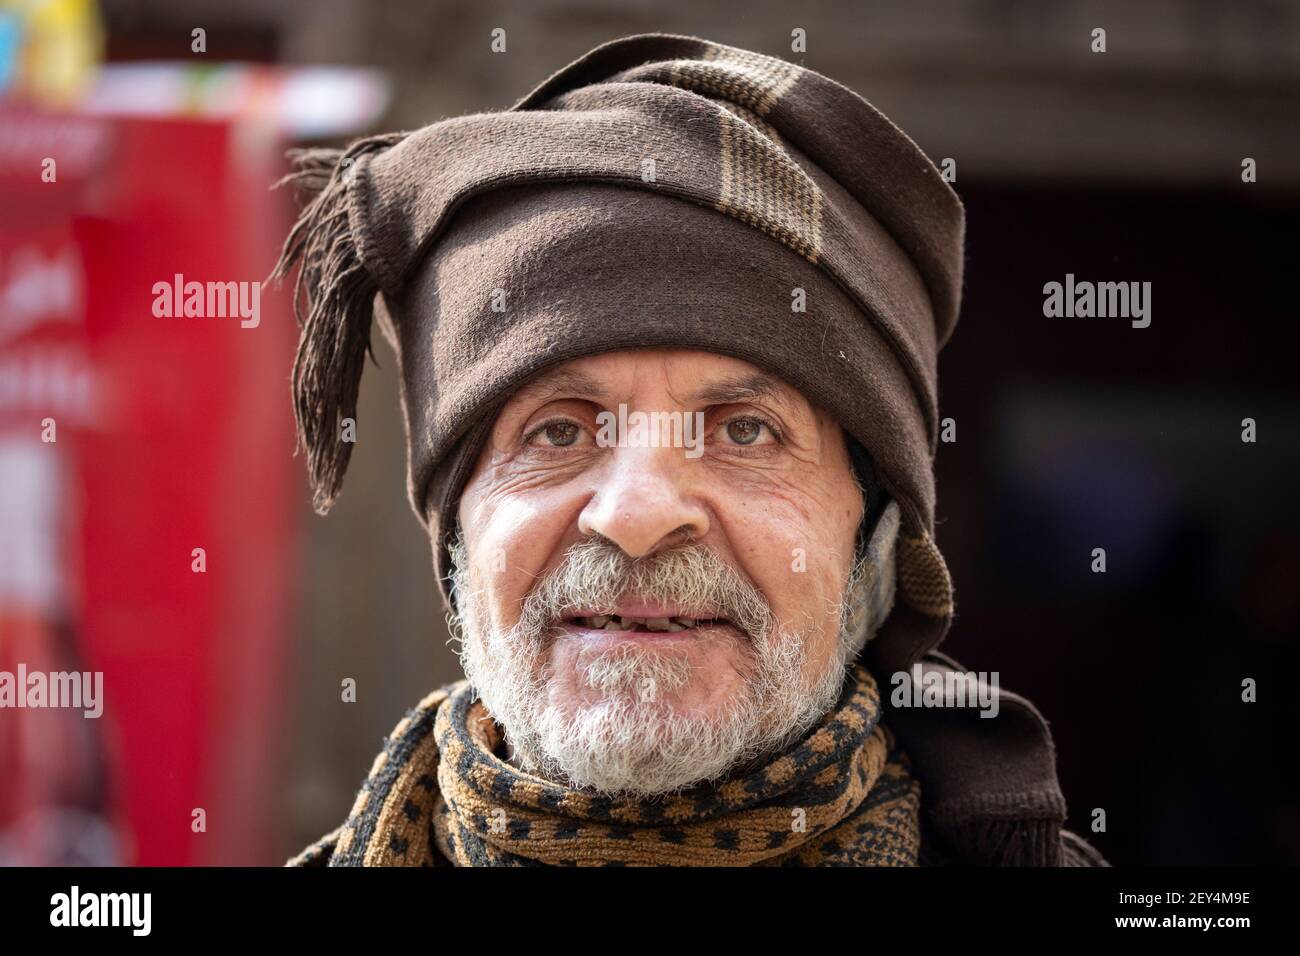 Portrait of an elderly Egyptian man wearing a headscraf in the Islamic Quarter of Cairo, Egypt Stock Photo